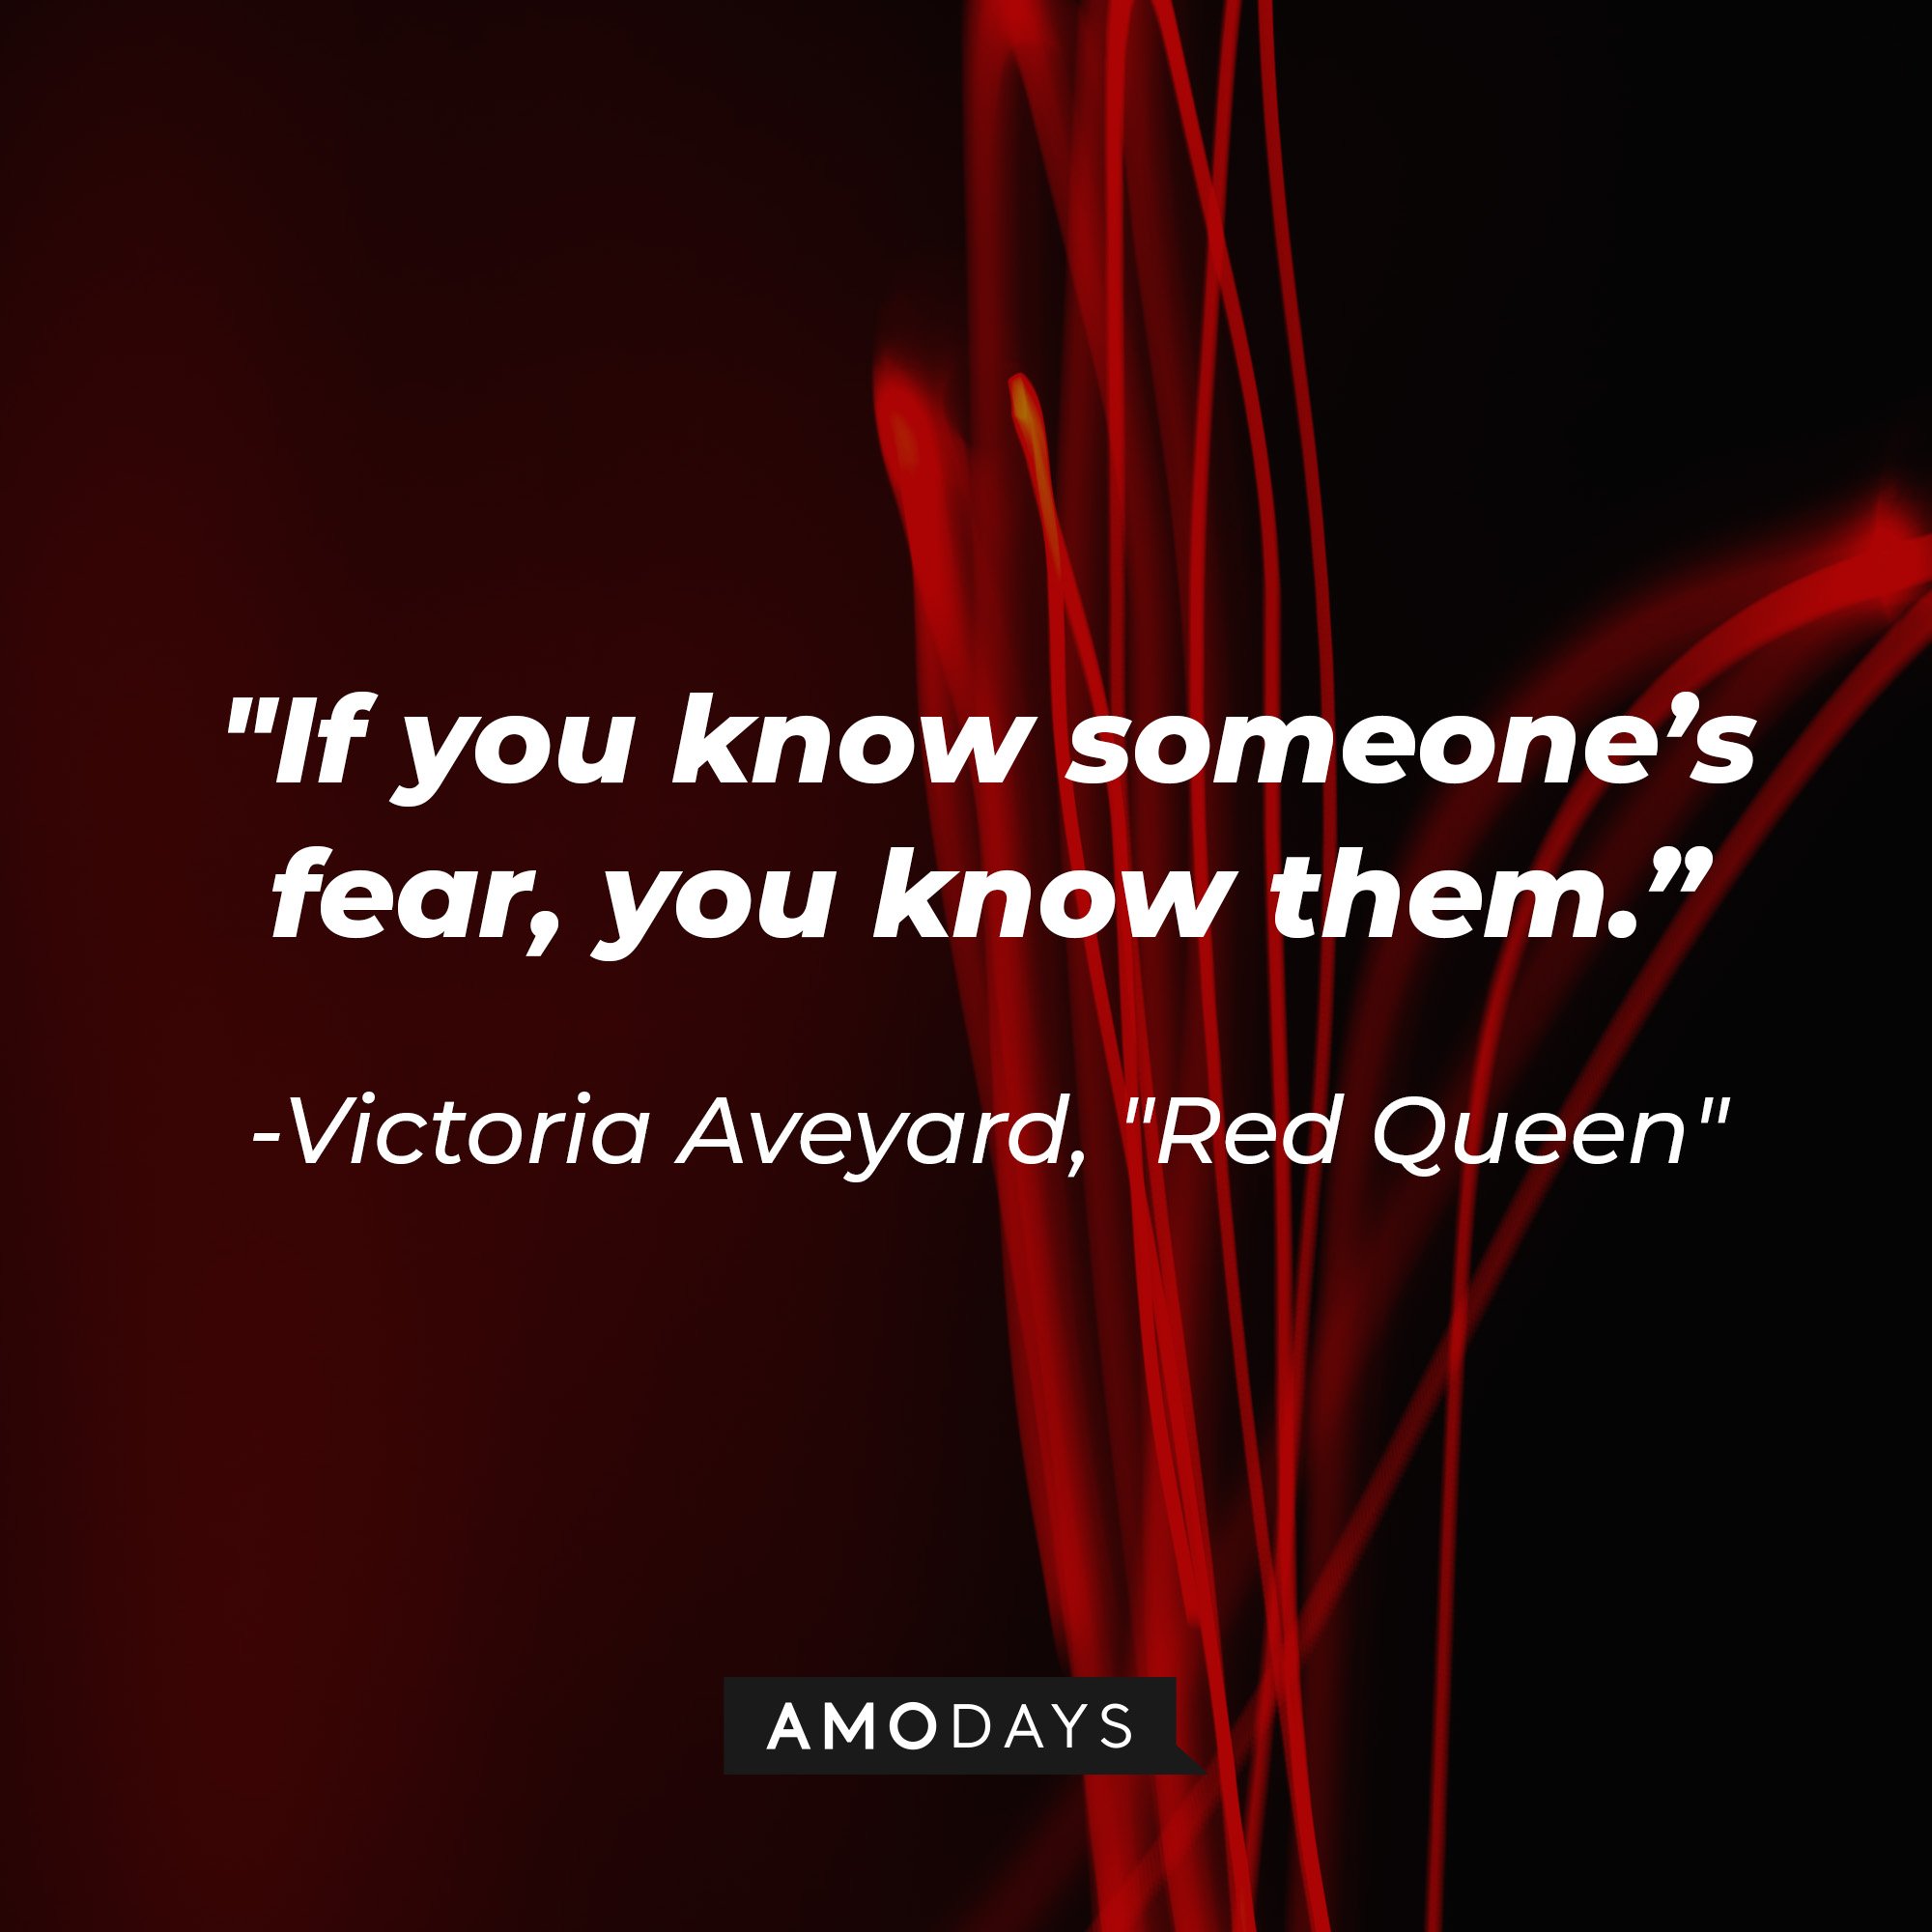  Victoria Aveyard’s quote in "Red Queen”: "If you know someone's fear, you know them." | Image: AmoDays